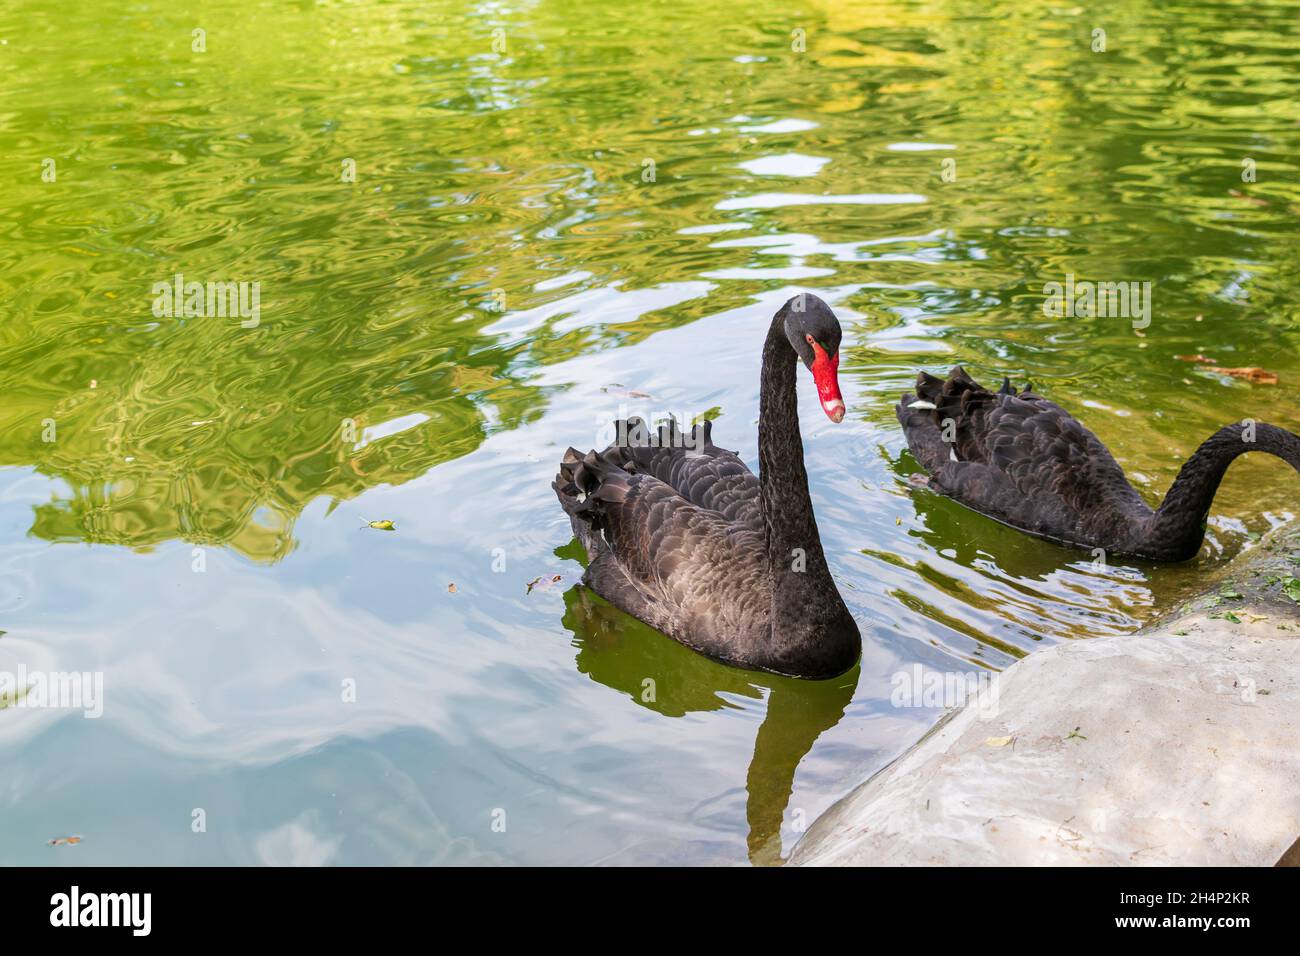 Black swans on the lake looking for food, autumn landscape Stock Photo